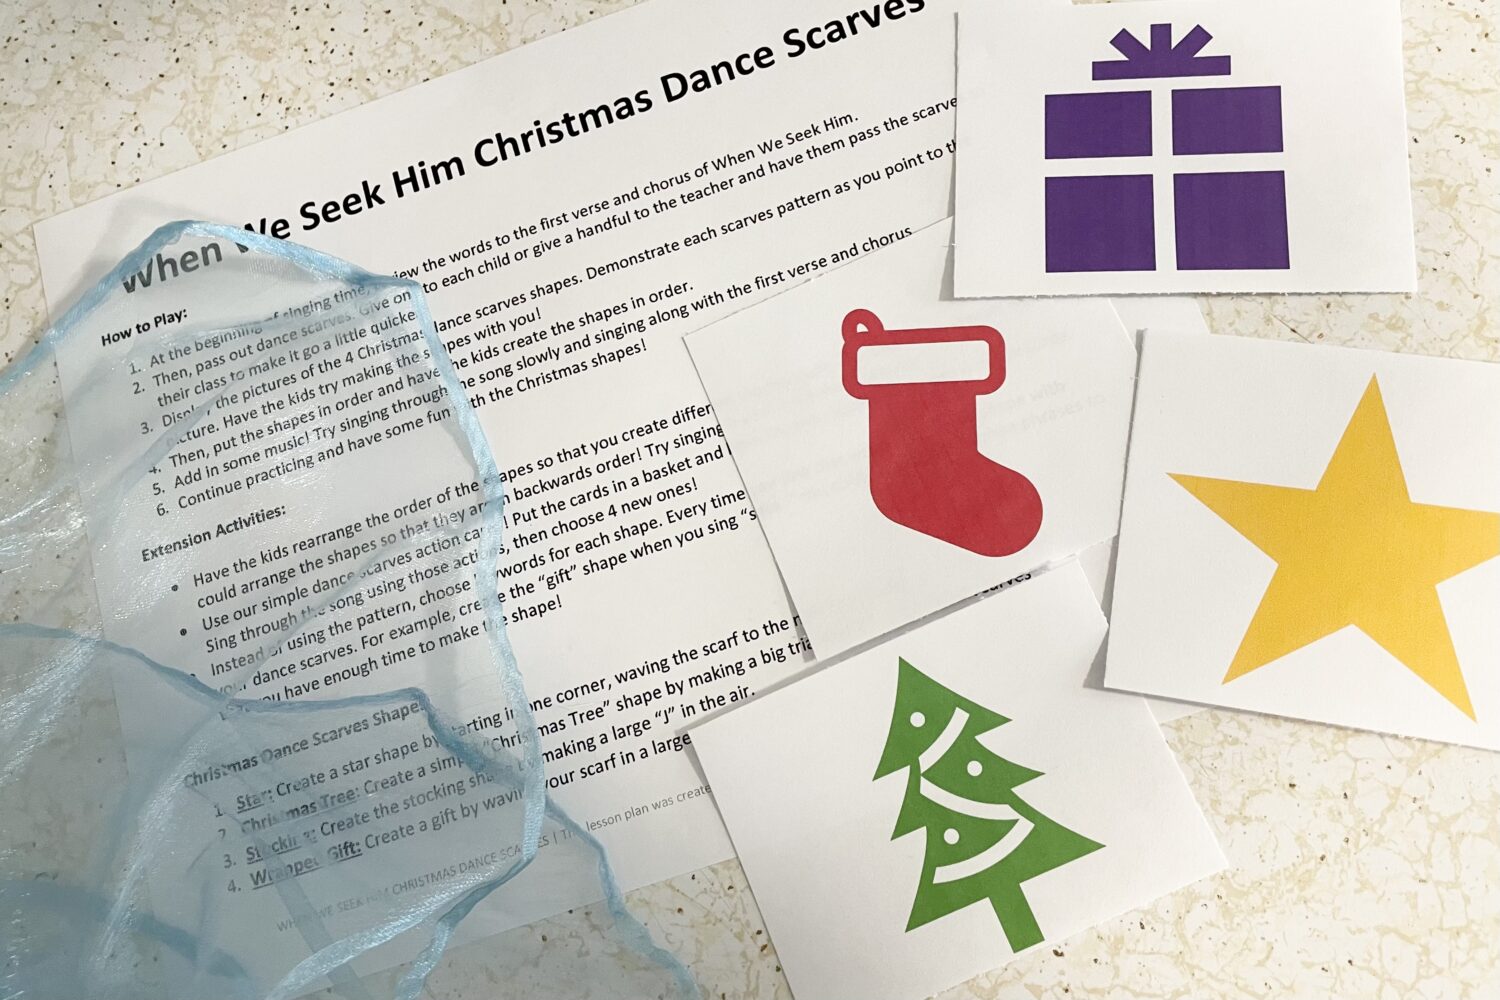 When We Seek Him Christmas Dance Scarves movement activity for children using dance scarves to create fun holiday shapes for LDS Primary Music Leaders teaching this song in singing time! 